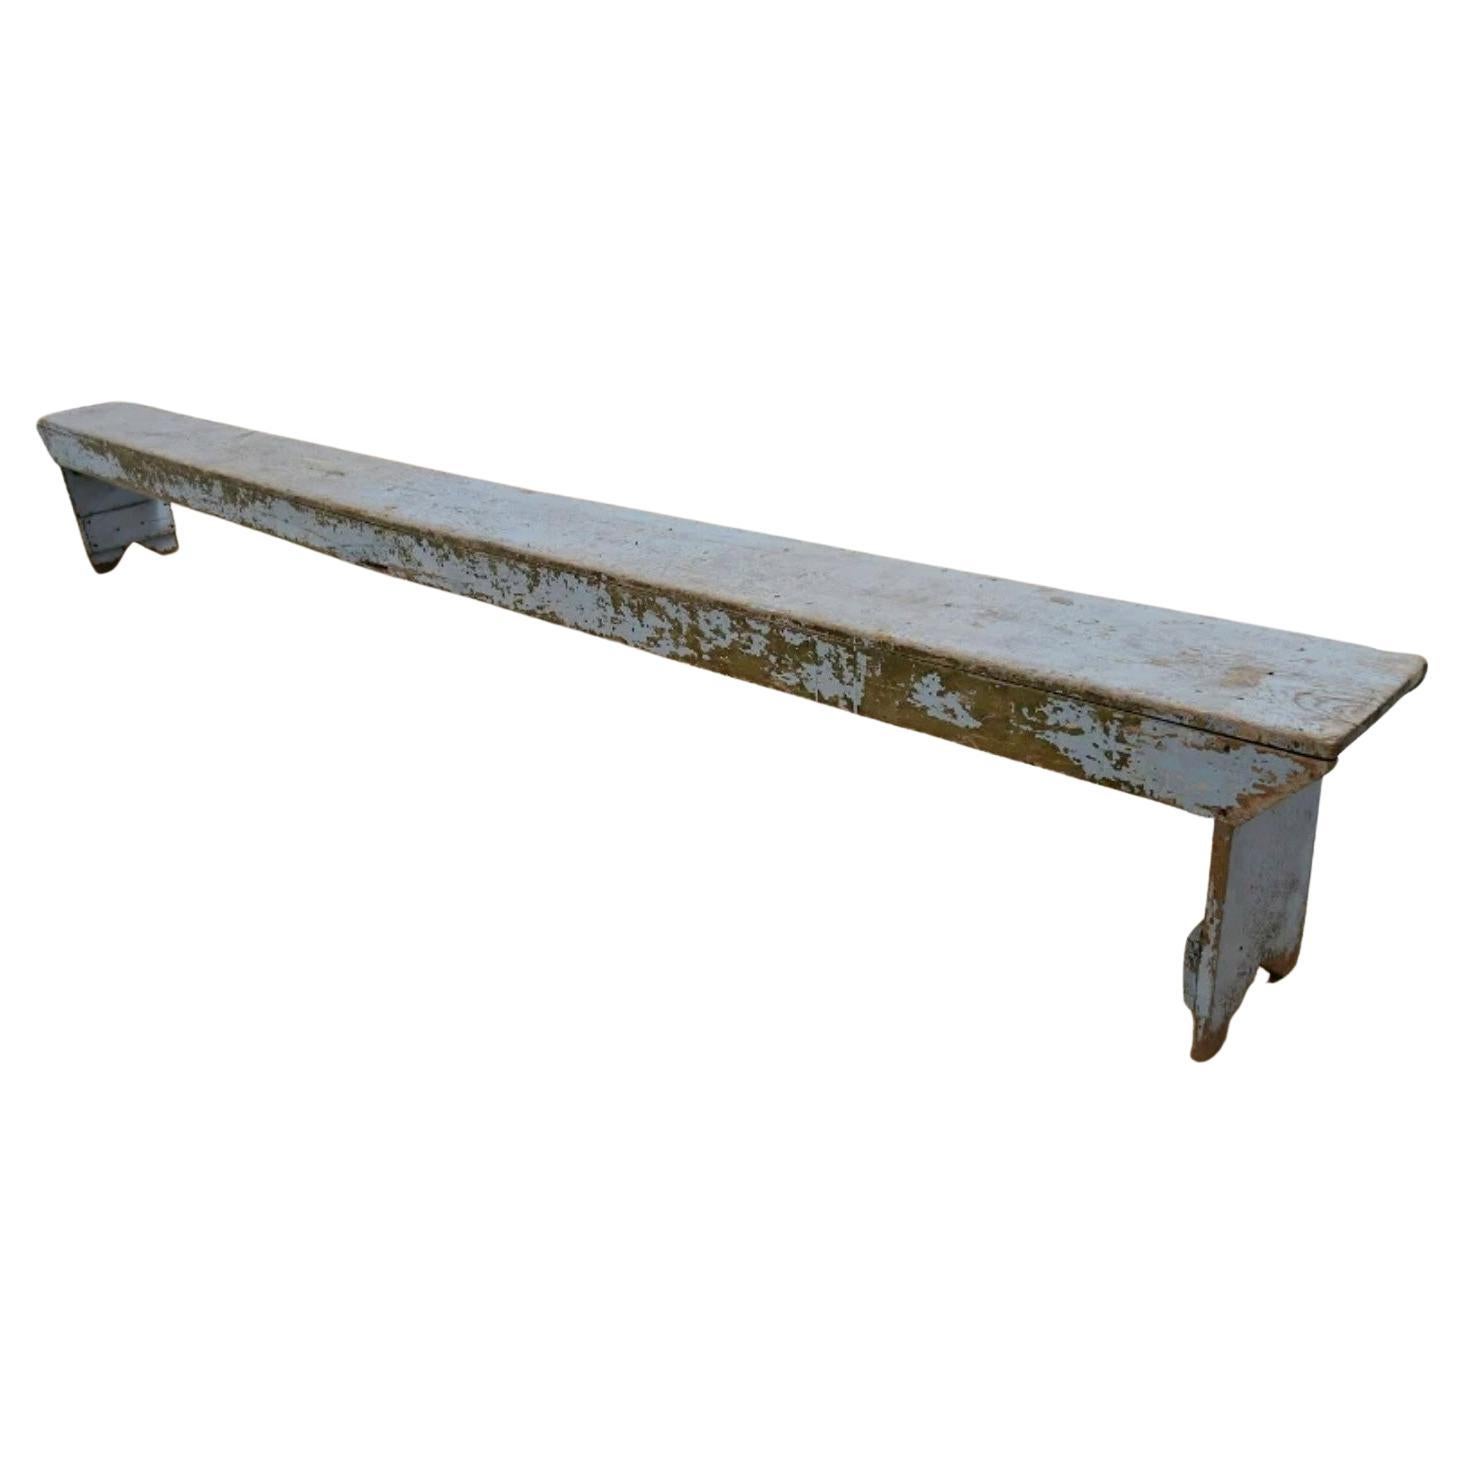 A monumental 12' Long Pennsylvania farmhouse painted wood bench. 

Born in the 19th Century, early American country style with Dutch / Scandinavian influence, simple primitive hand-crafted solid wood construction, featuring the original sky blue